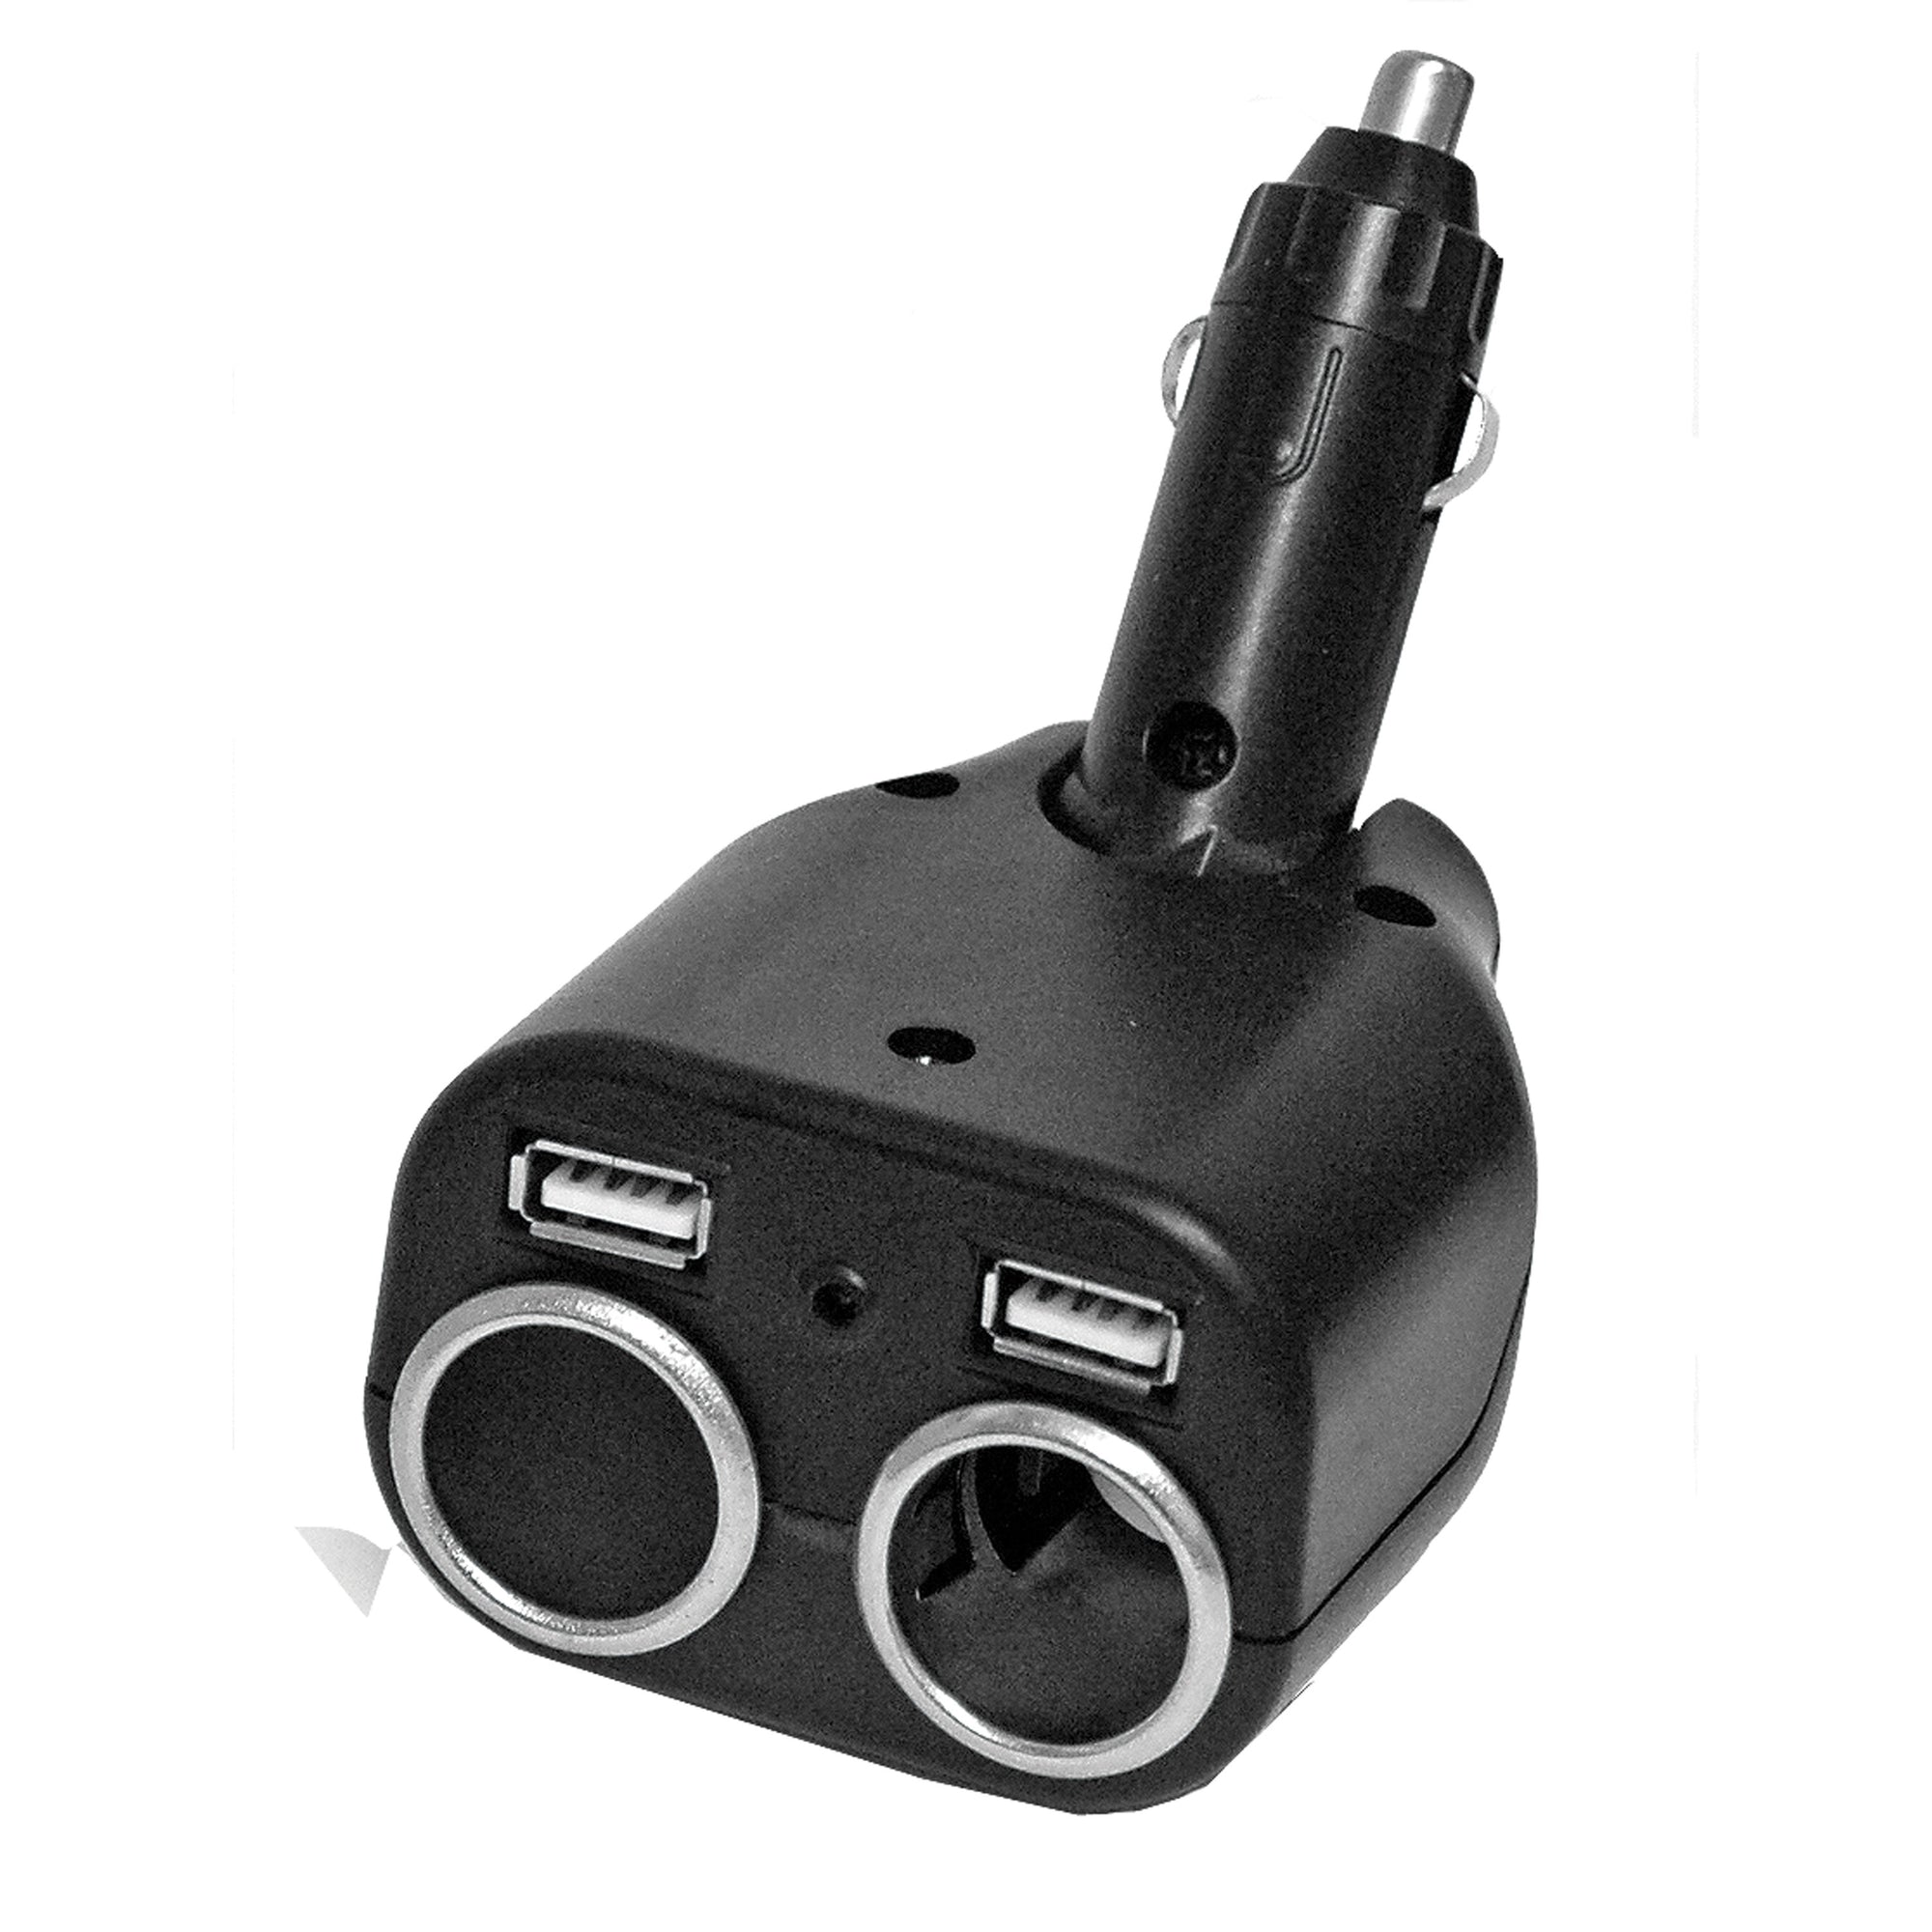 Prime Products 08-5048 12V Adapter with Dual Outlets and USB Ports